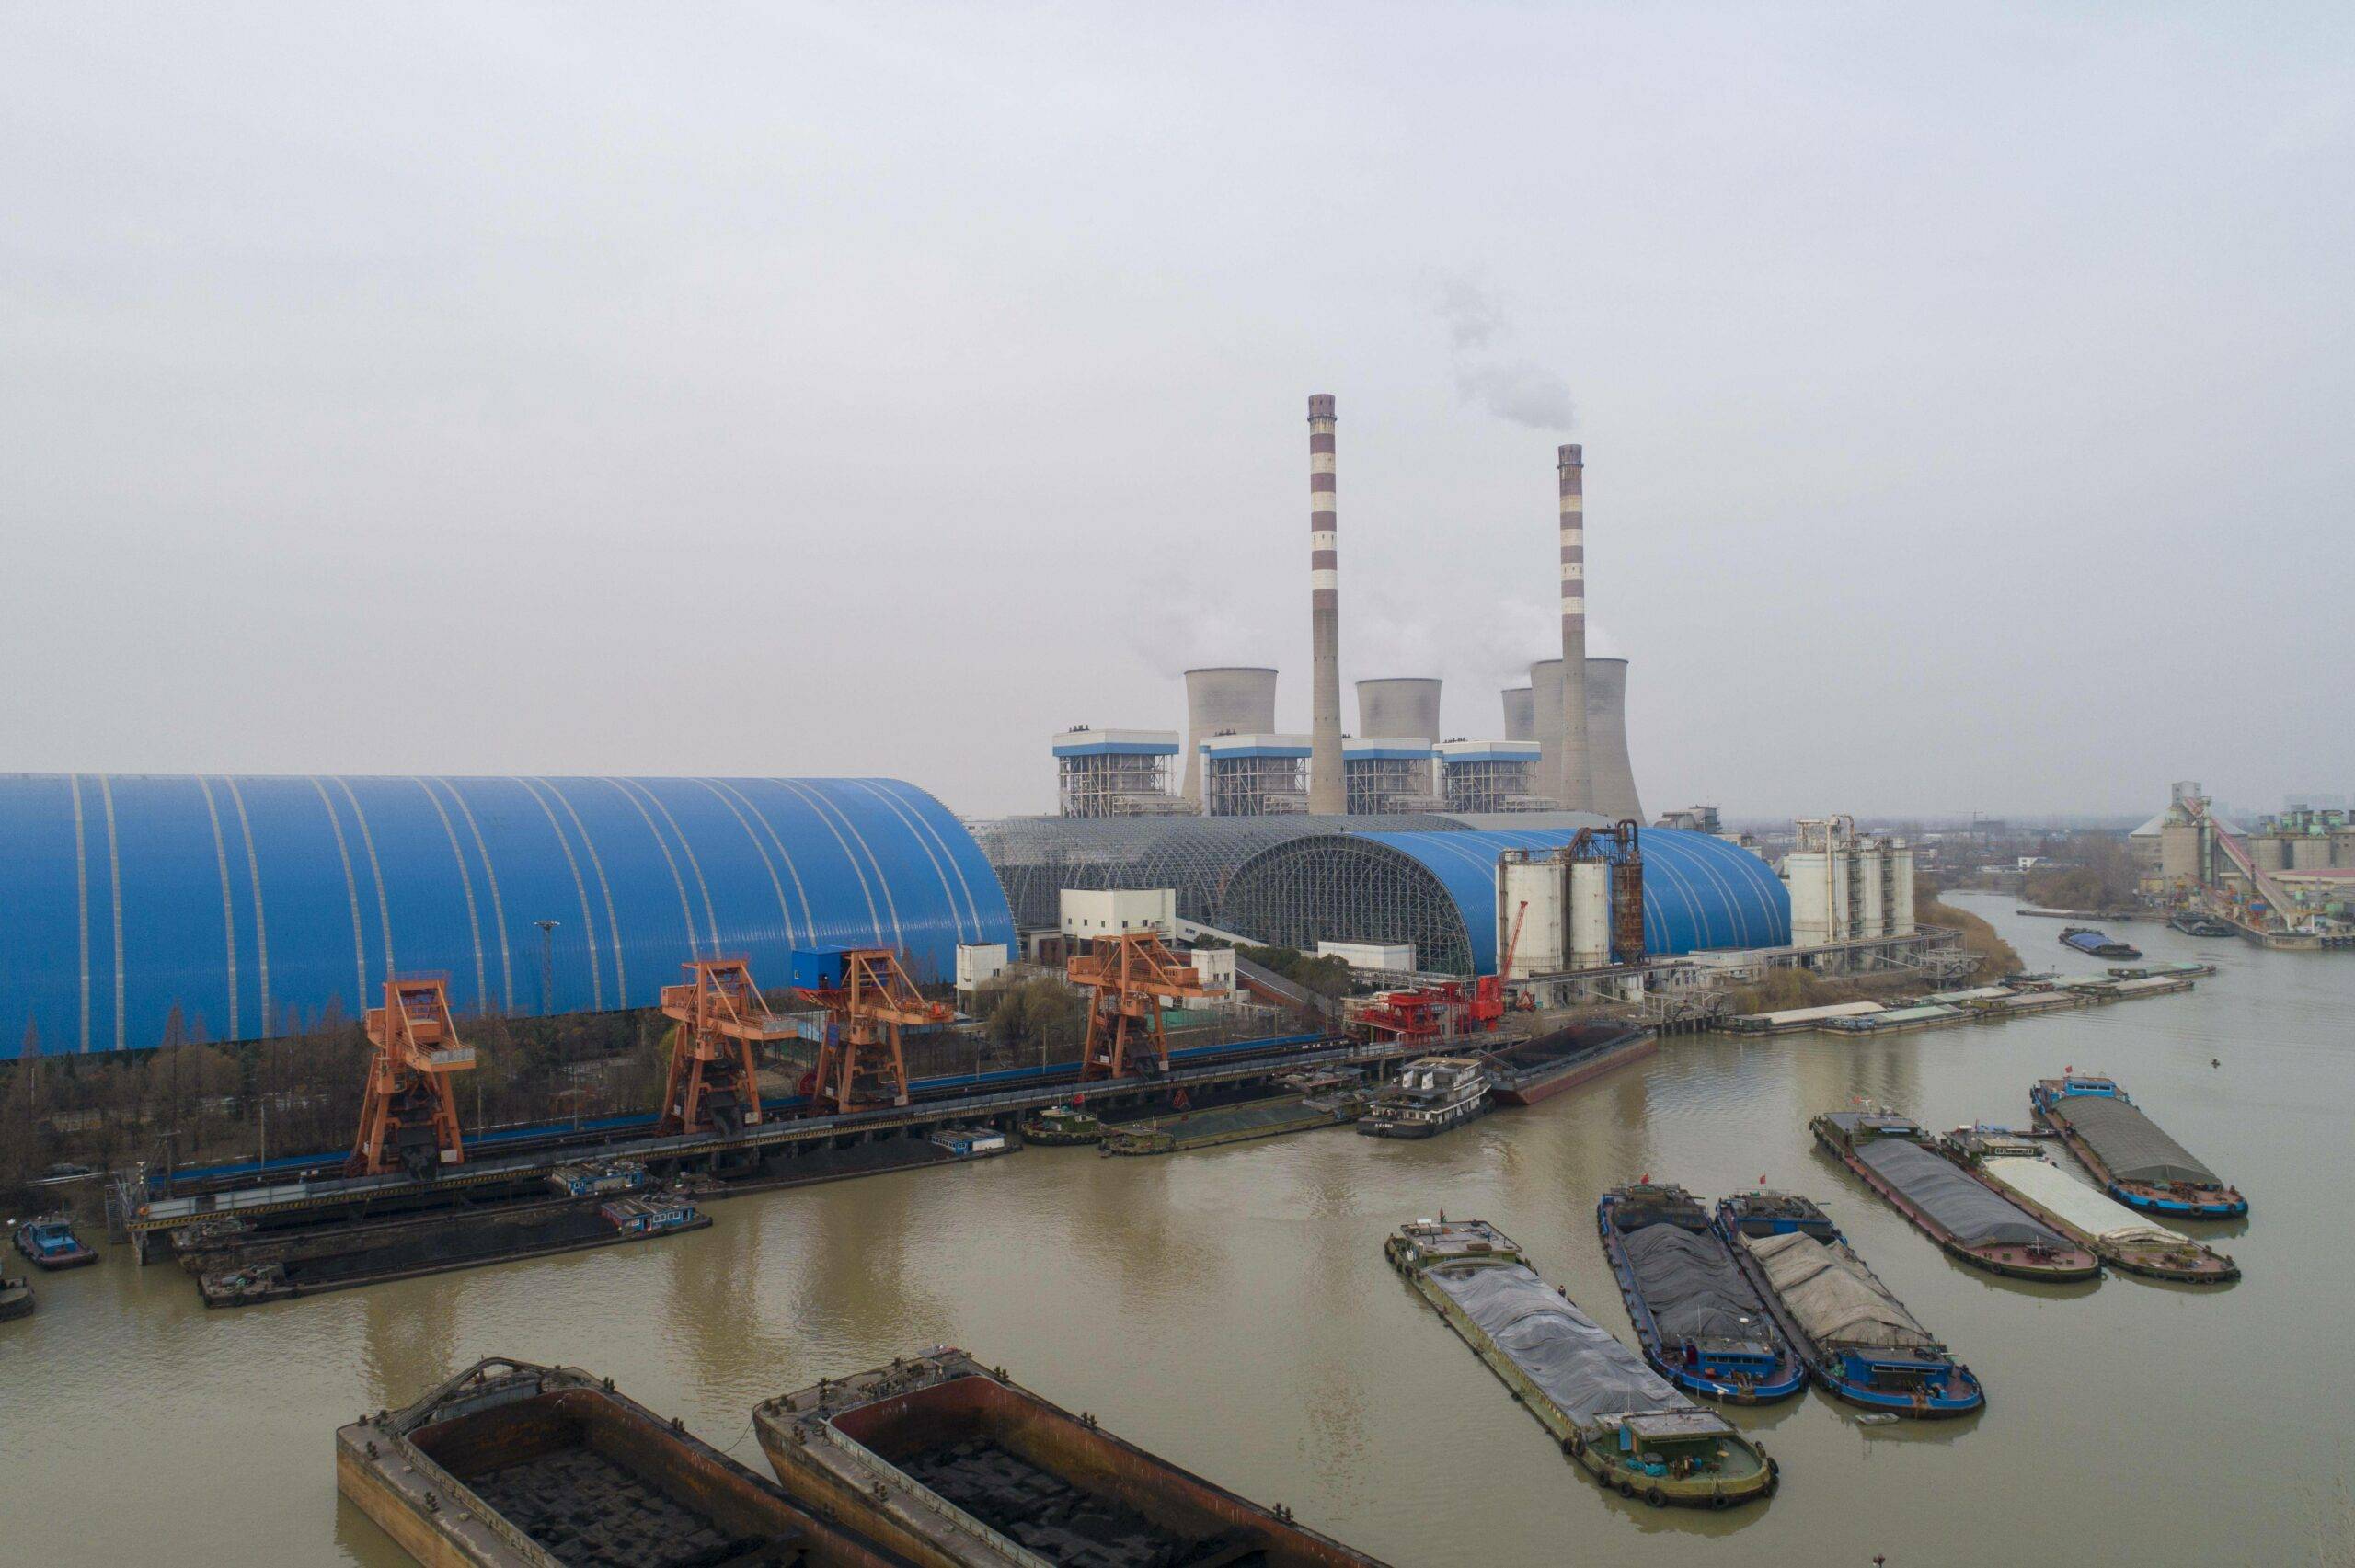 HUAI'AN, CHINA - DECEMBER 26, 2020 - Workers work on the roof of a closed coal yard in Huai 'an, East China's Jiangsu Province, Dec. 26, 2020. In order to create an ecological factory, effectively control surrounding dust and purify the environment, Huai 'an Huaneng Huaiyin Power Plant started the coal yard closed renovation project.
 (Photo by He Jinghua / Costfoto/Sipa USA)/31836610//2012261205